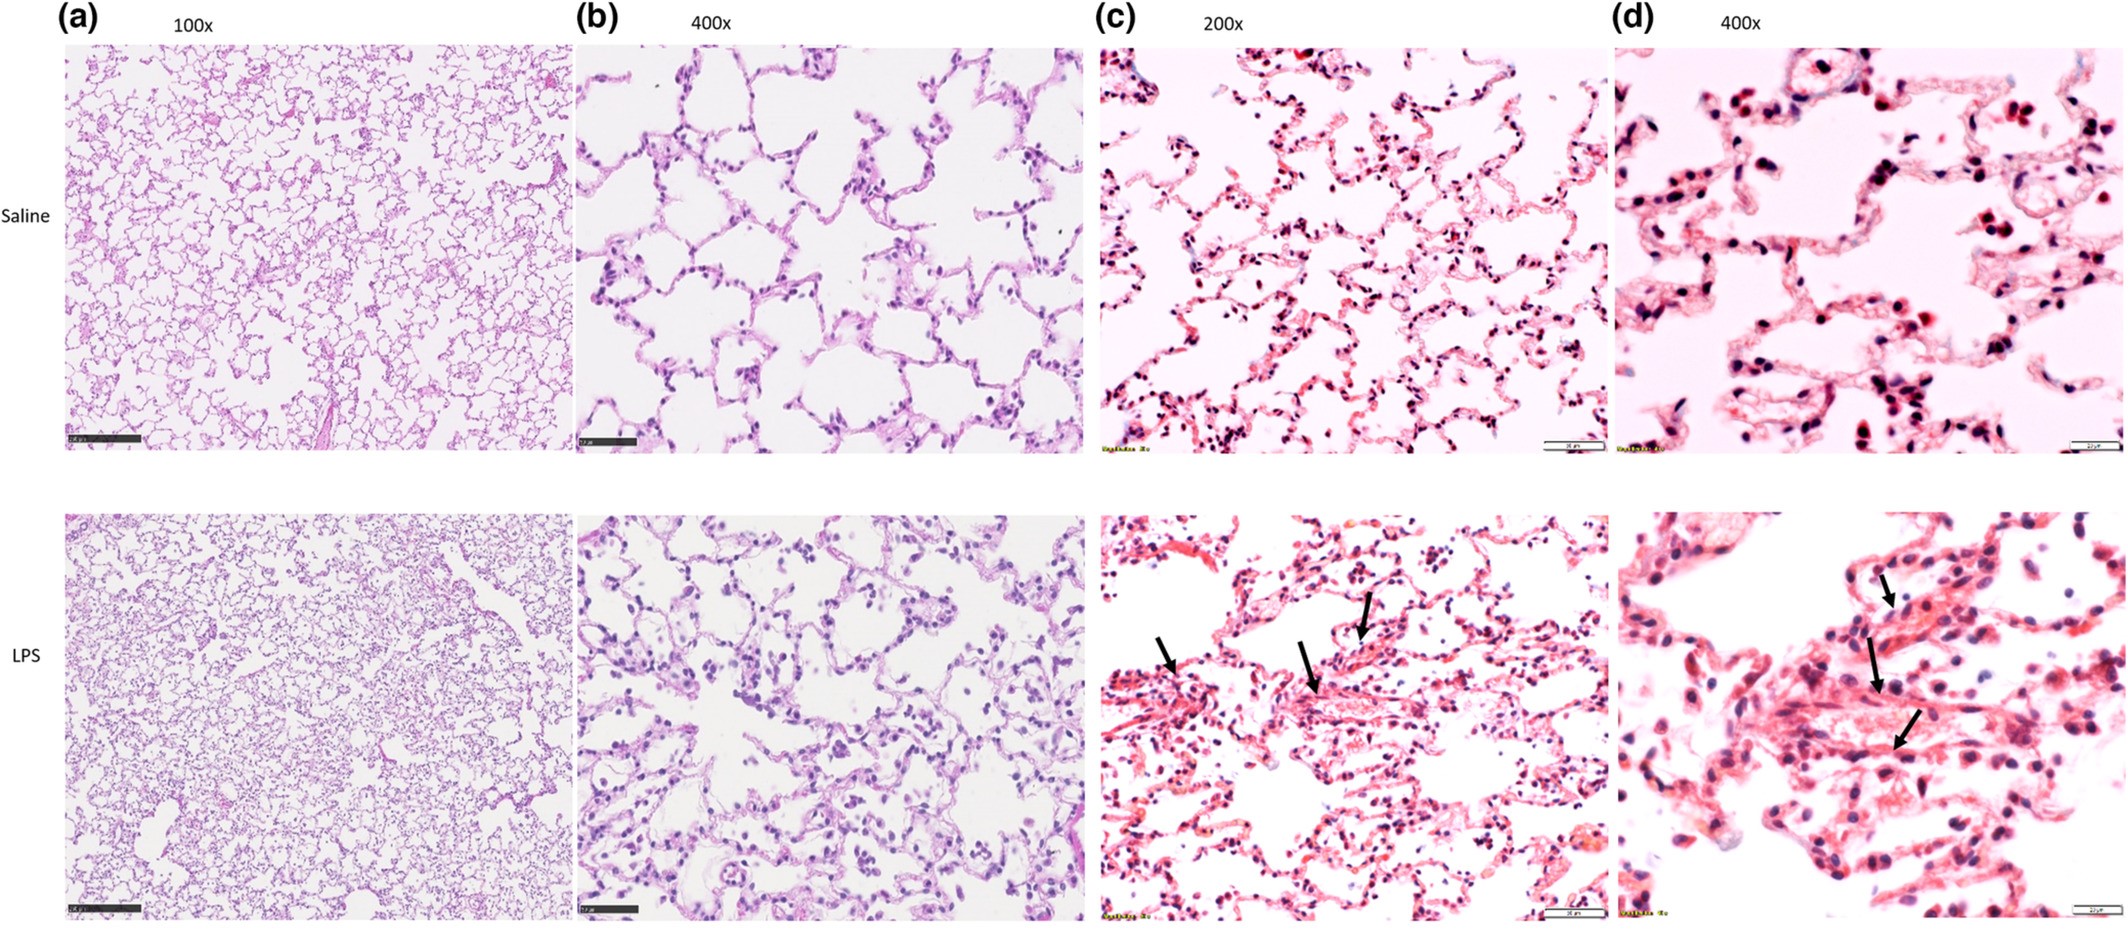 Lung histological changes in ferrets following saline and/or LPS administration